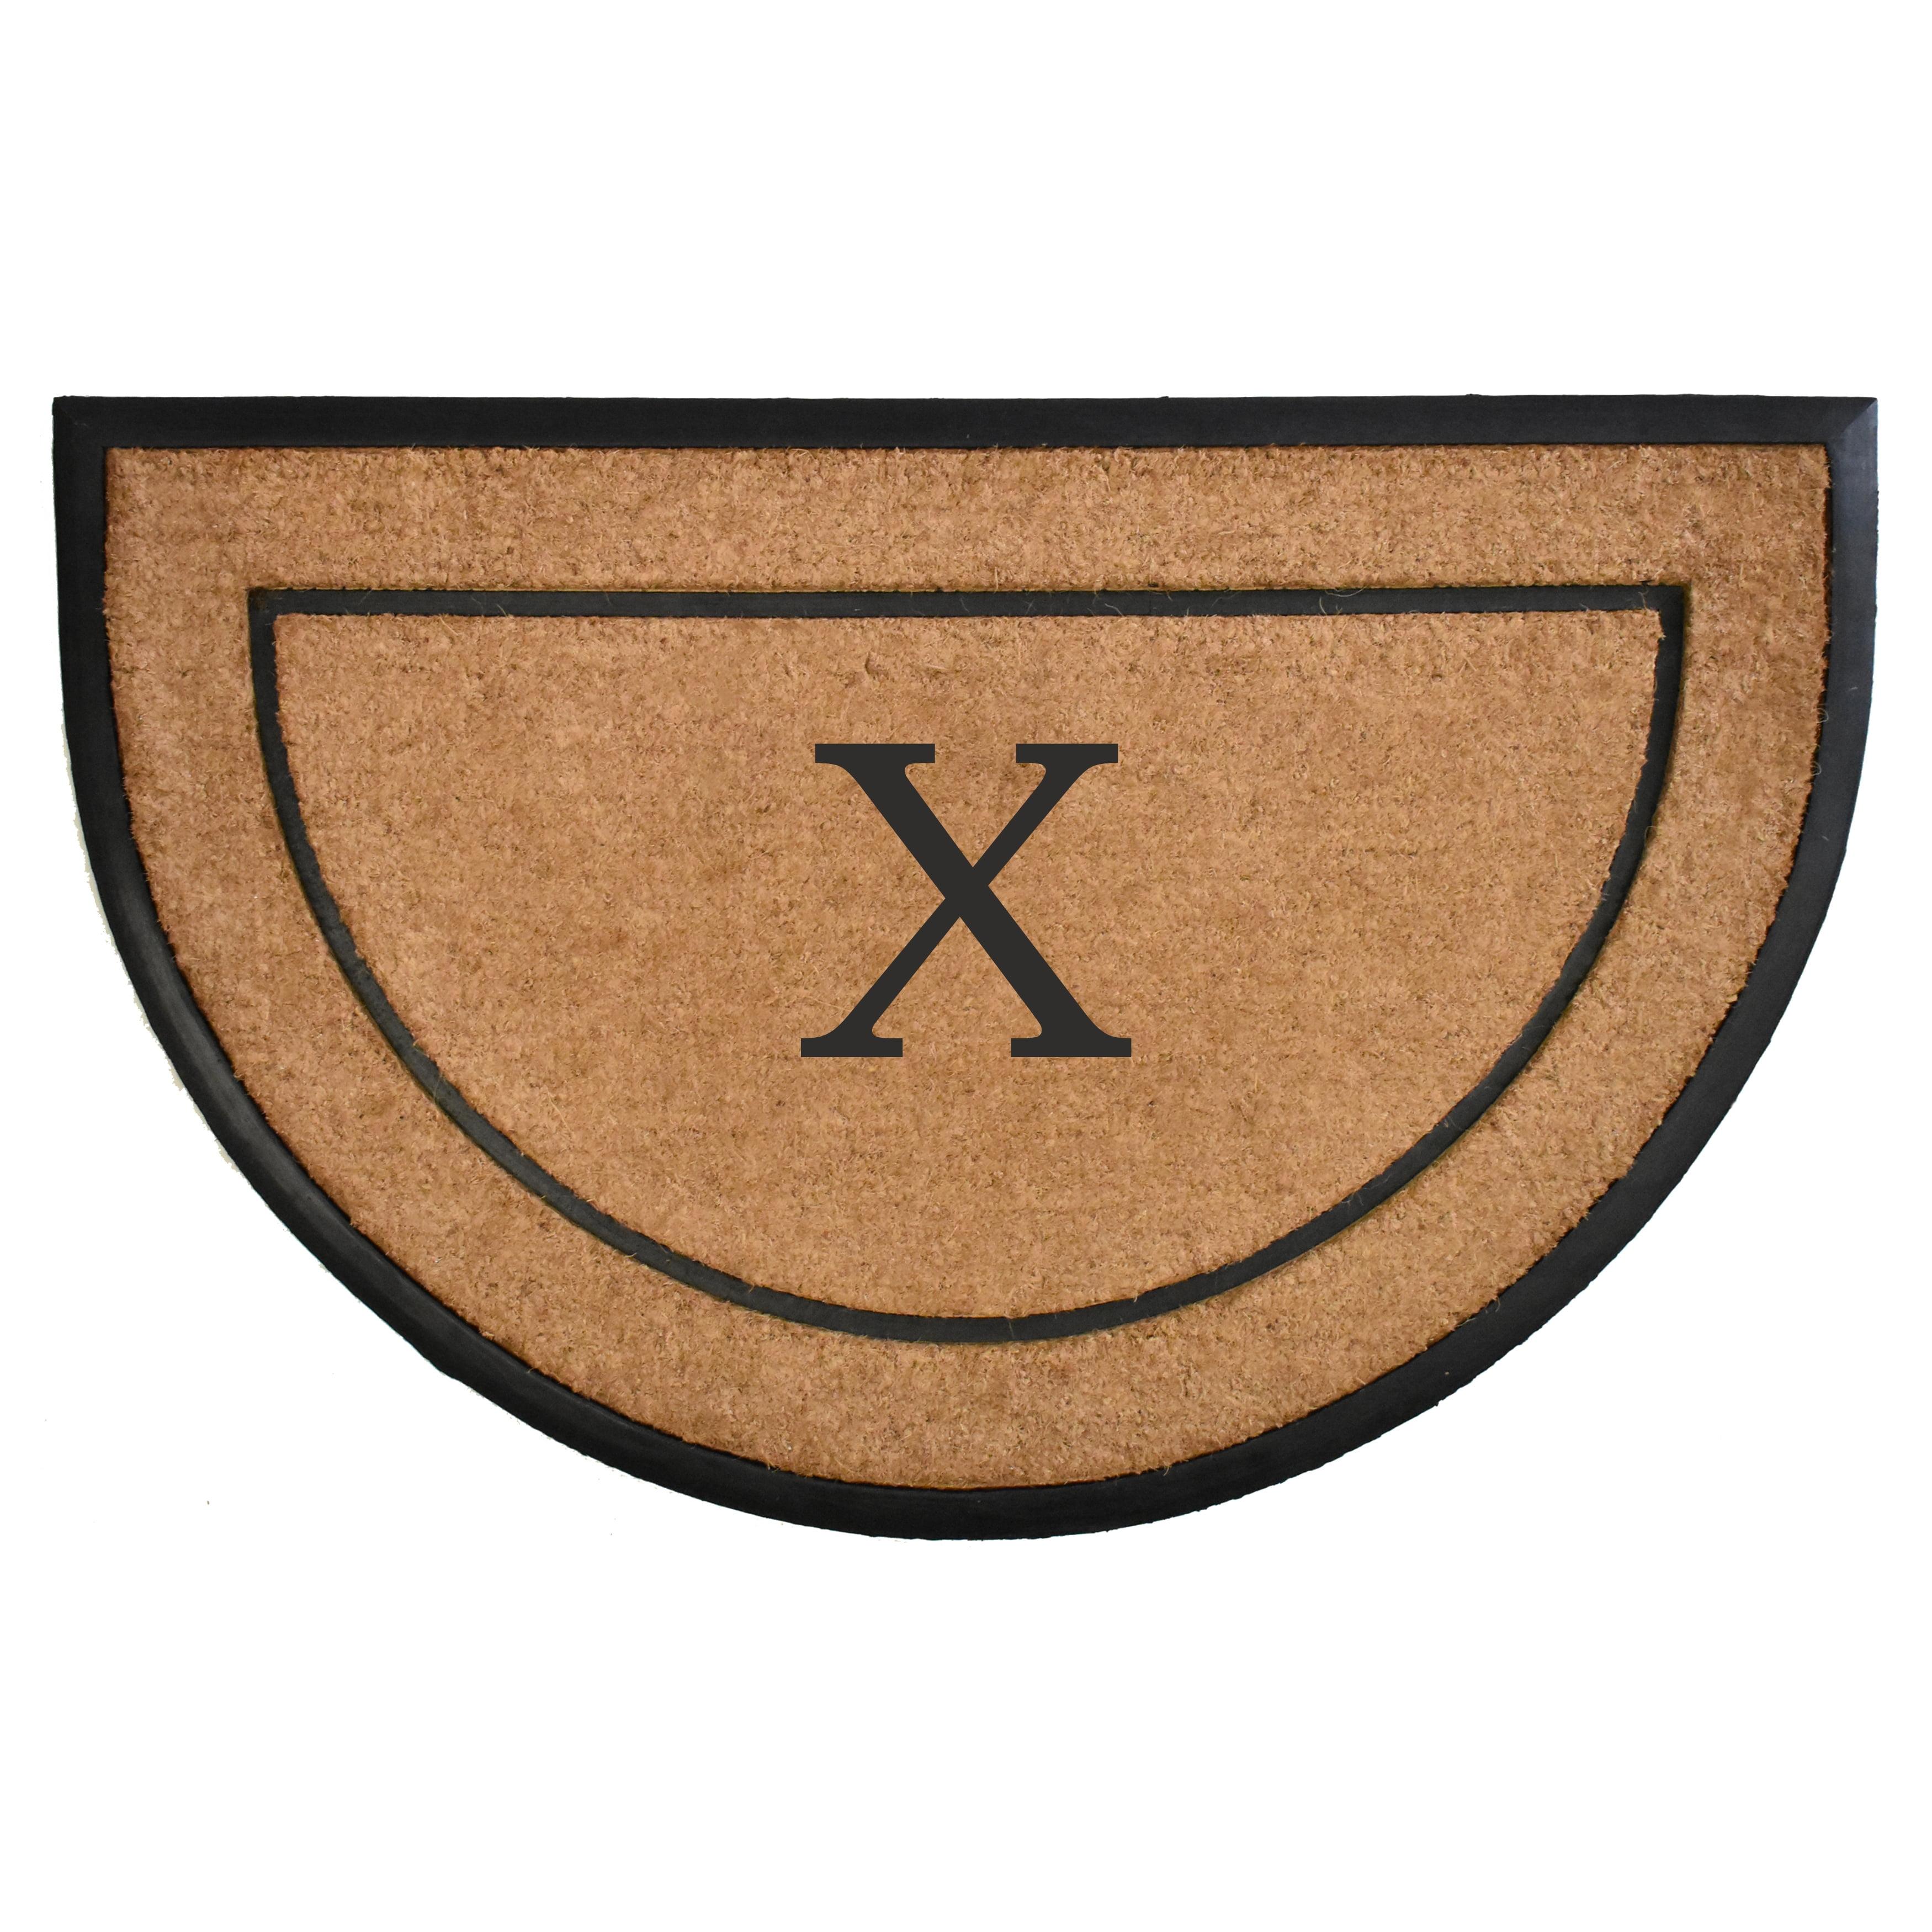 Elegant Half-Circle Personalized Coir Doormat with Rubber Backing, 24" x 36", Letter X